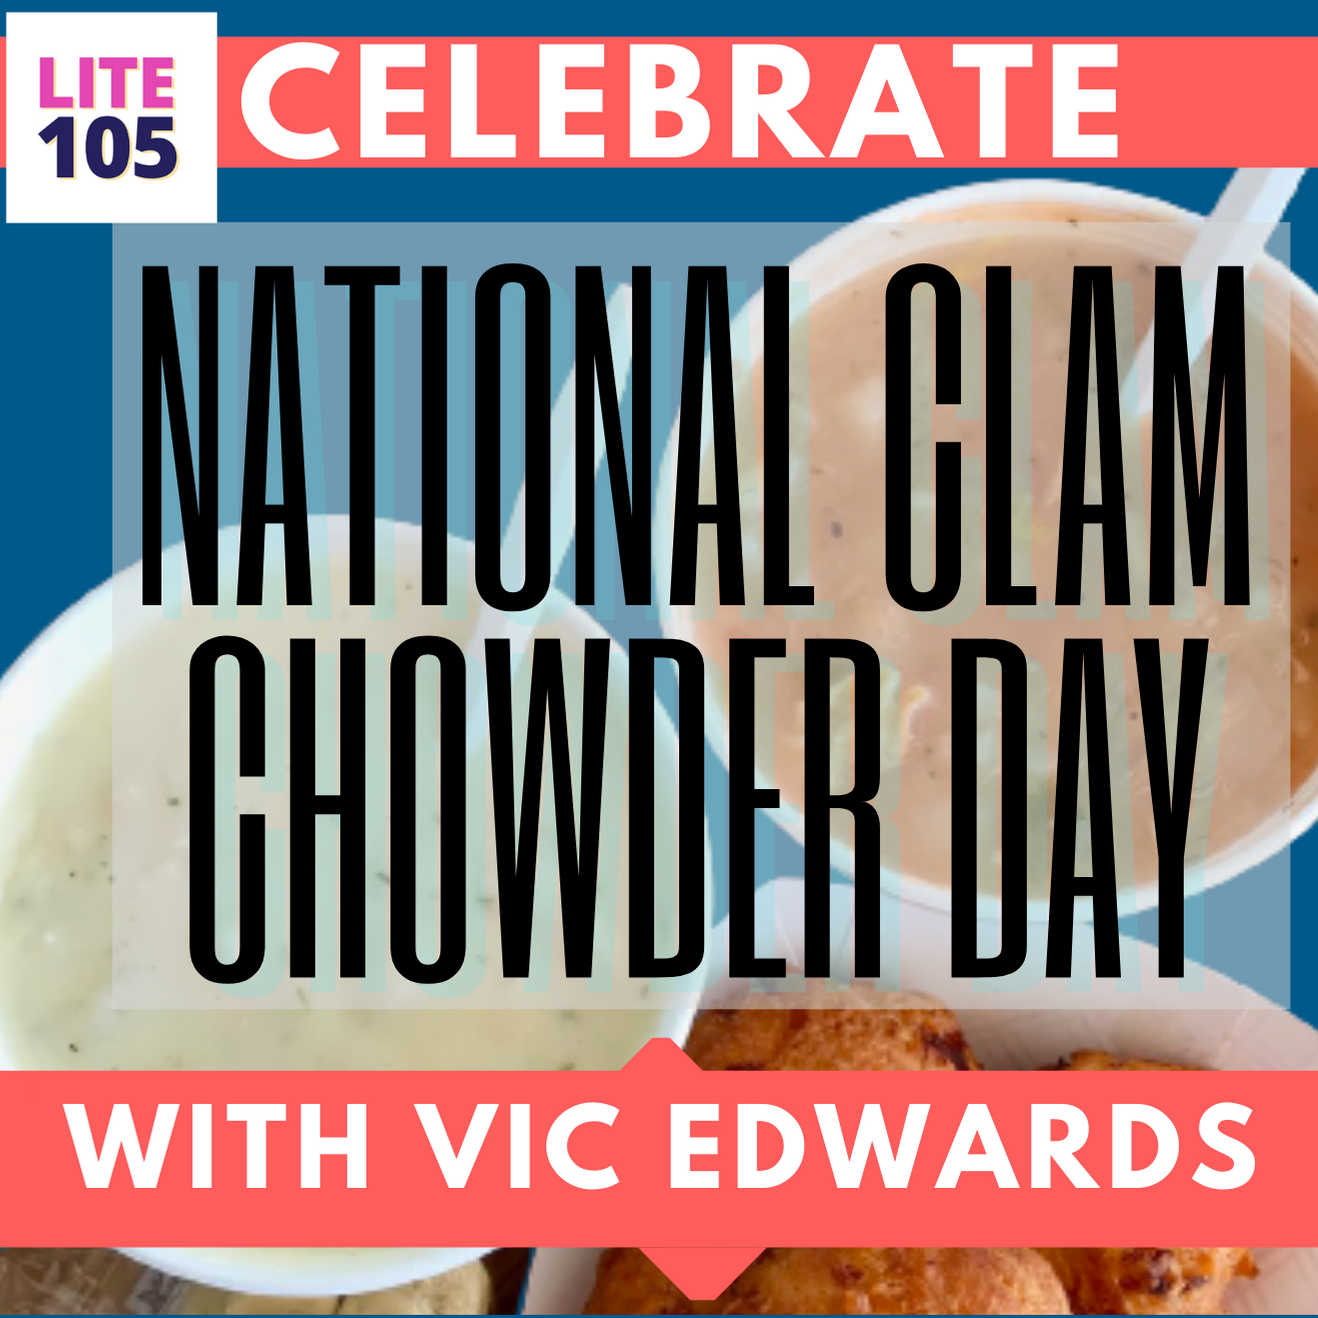 CELEBRATE National Clam Chowder Day with Lite 105’s Vic Edwards!